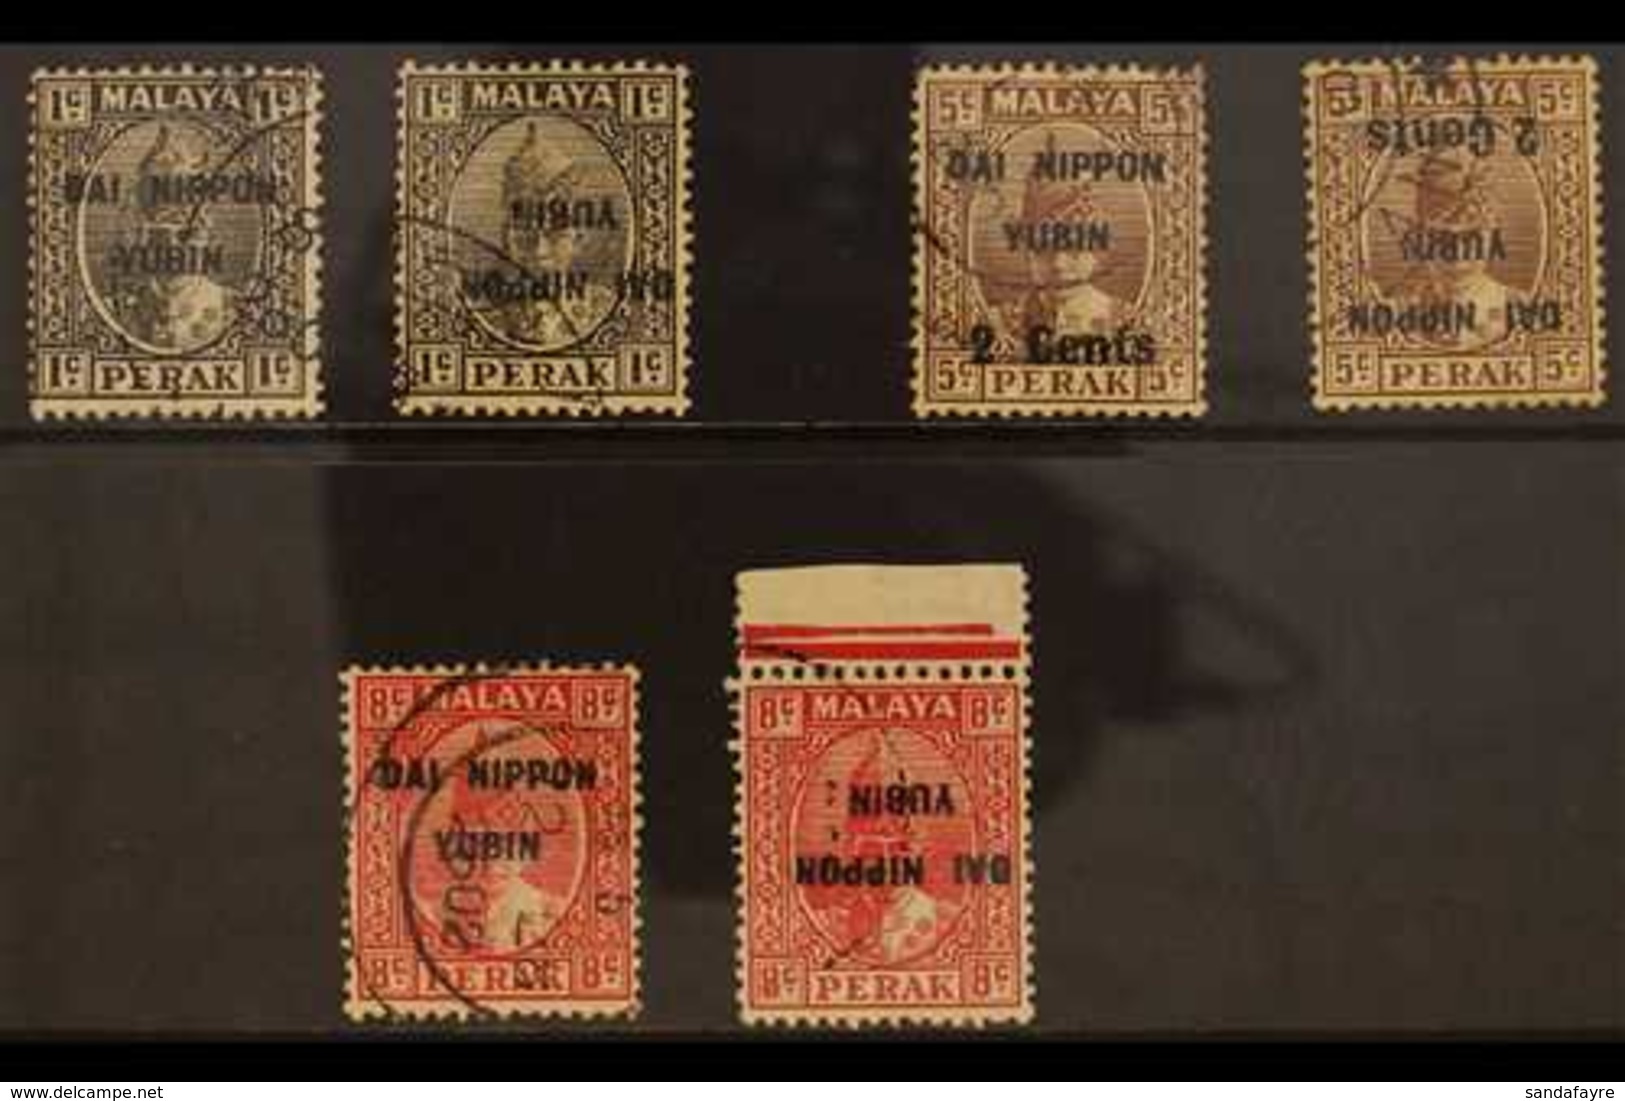 GENERAL ISSUES 1942 (Nov) Perak Stamps With "DAI NIPPON YUBIN" Overprints - The Set With Normal Overprints (SG J260/62), - Other & Unclassified